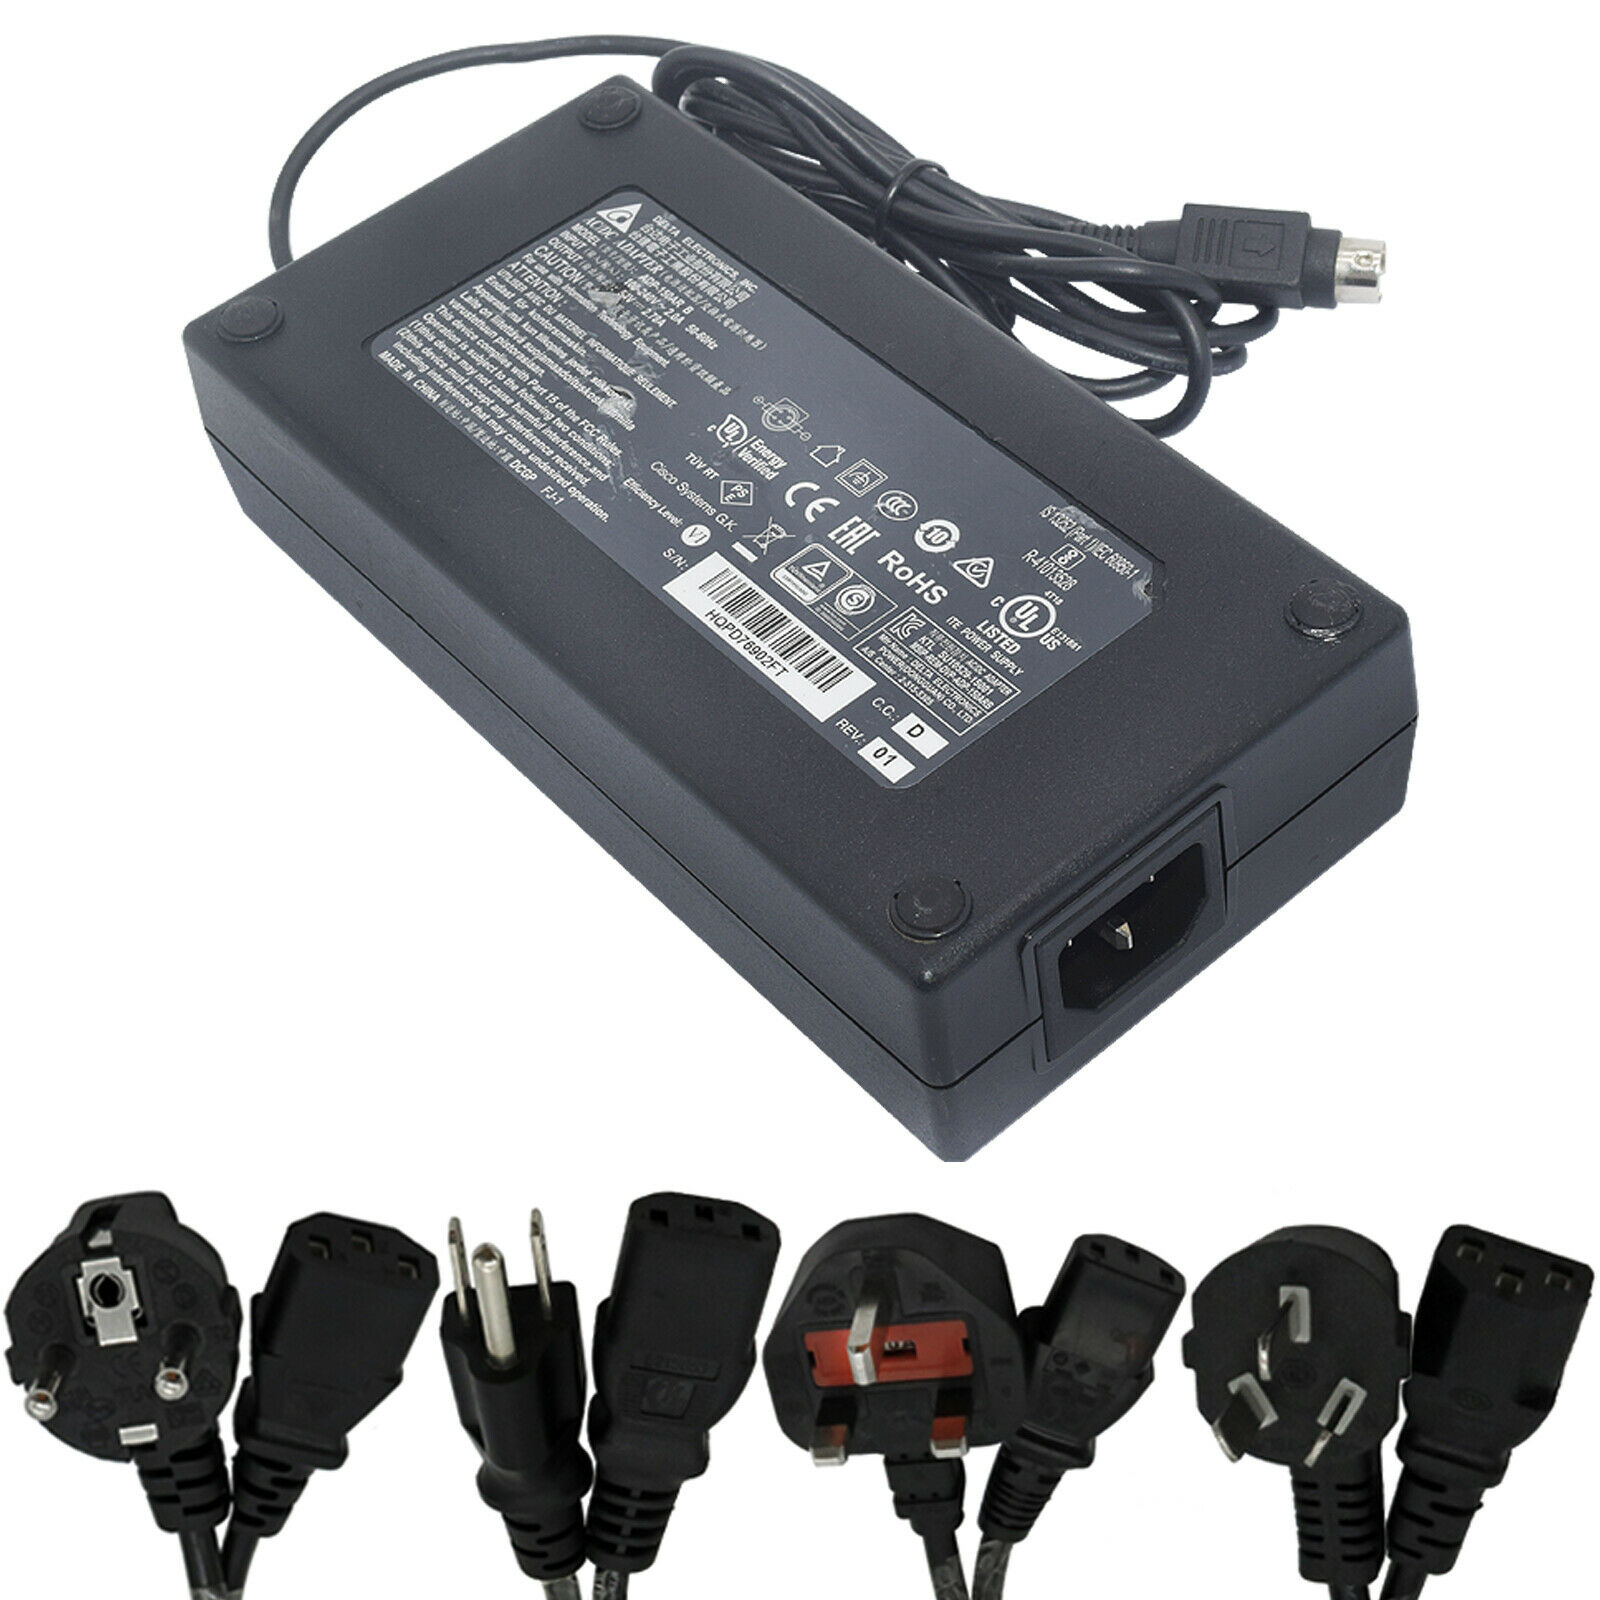 Genuine Delta For MSI Laptop Power Supply AC Adapter ADP-150AR B 150W 54V 4-PINS Model: ADP-150AR B Modified Item: N - Click Image to Close